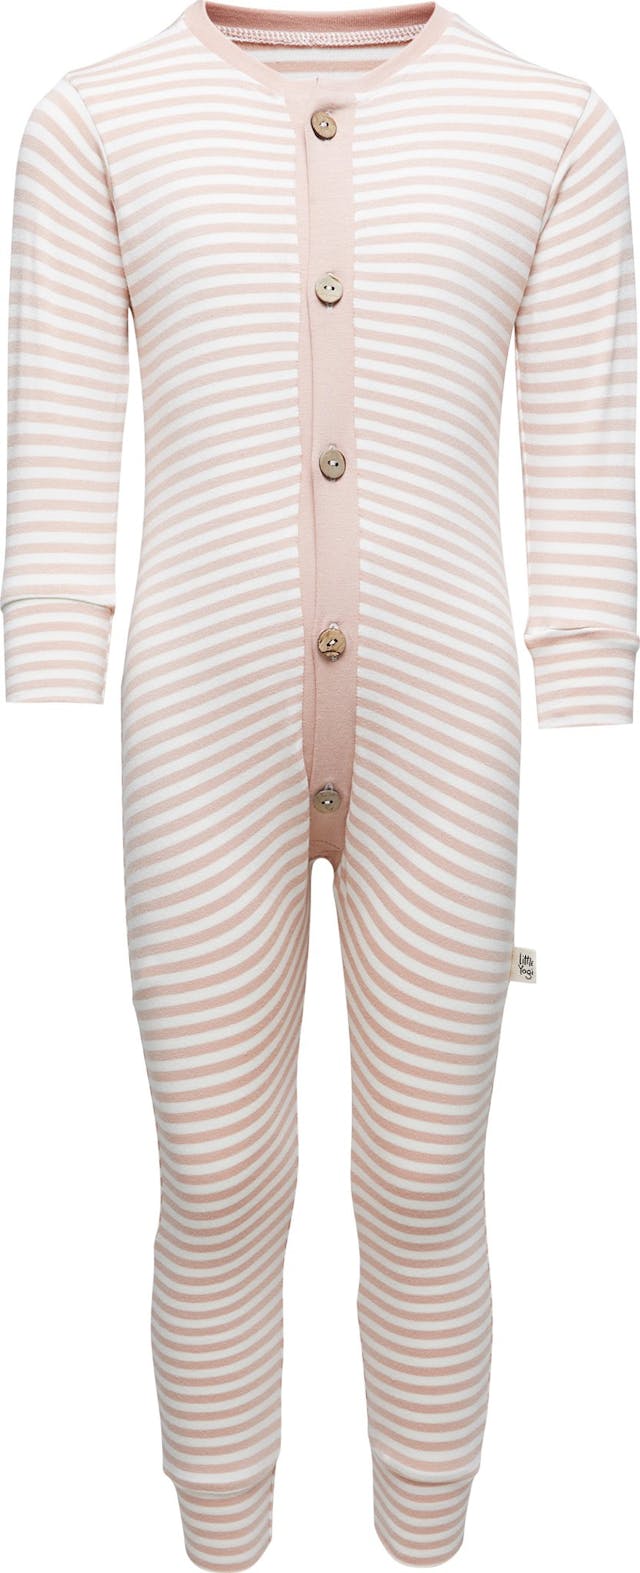 Product image for Stripes Long Romper - Baby